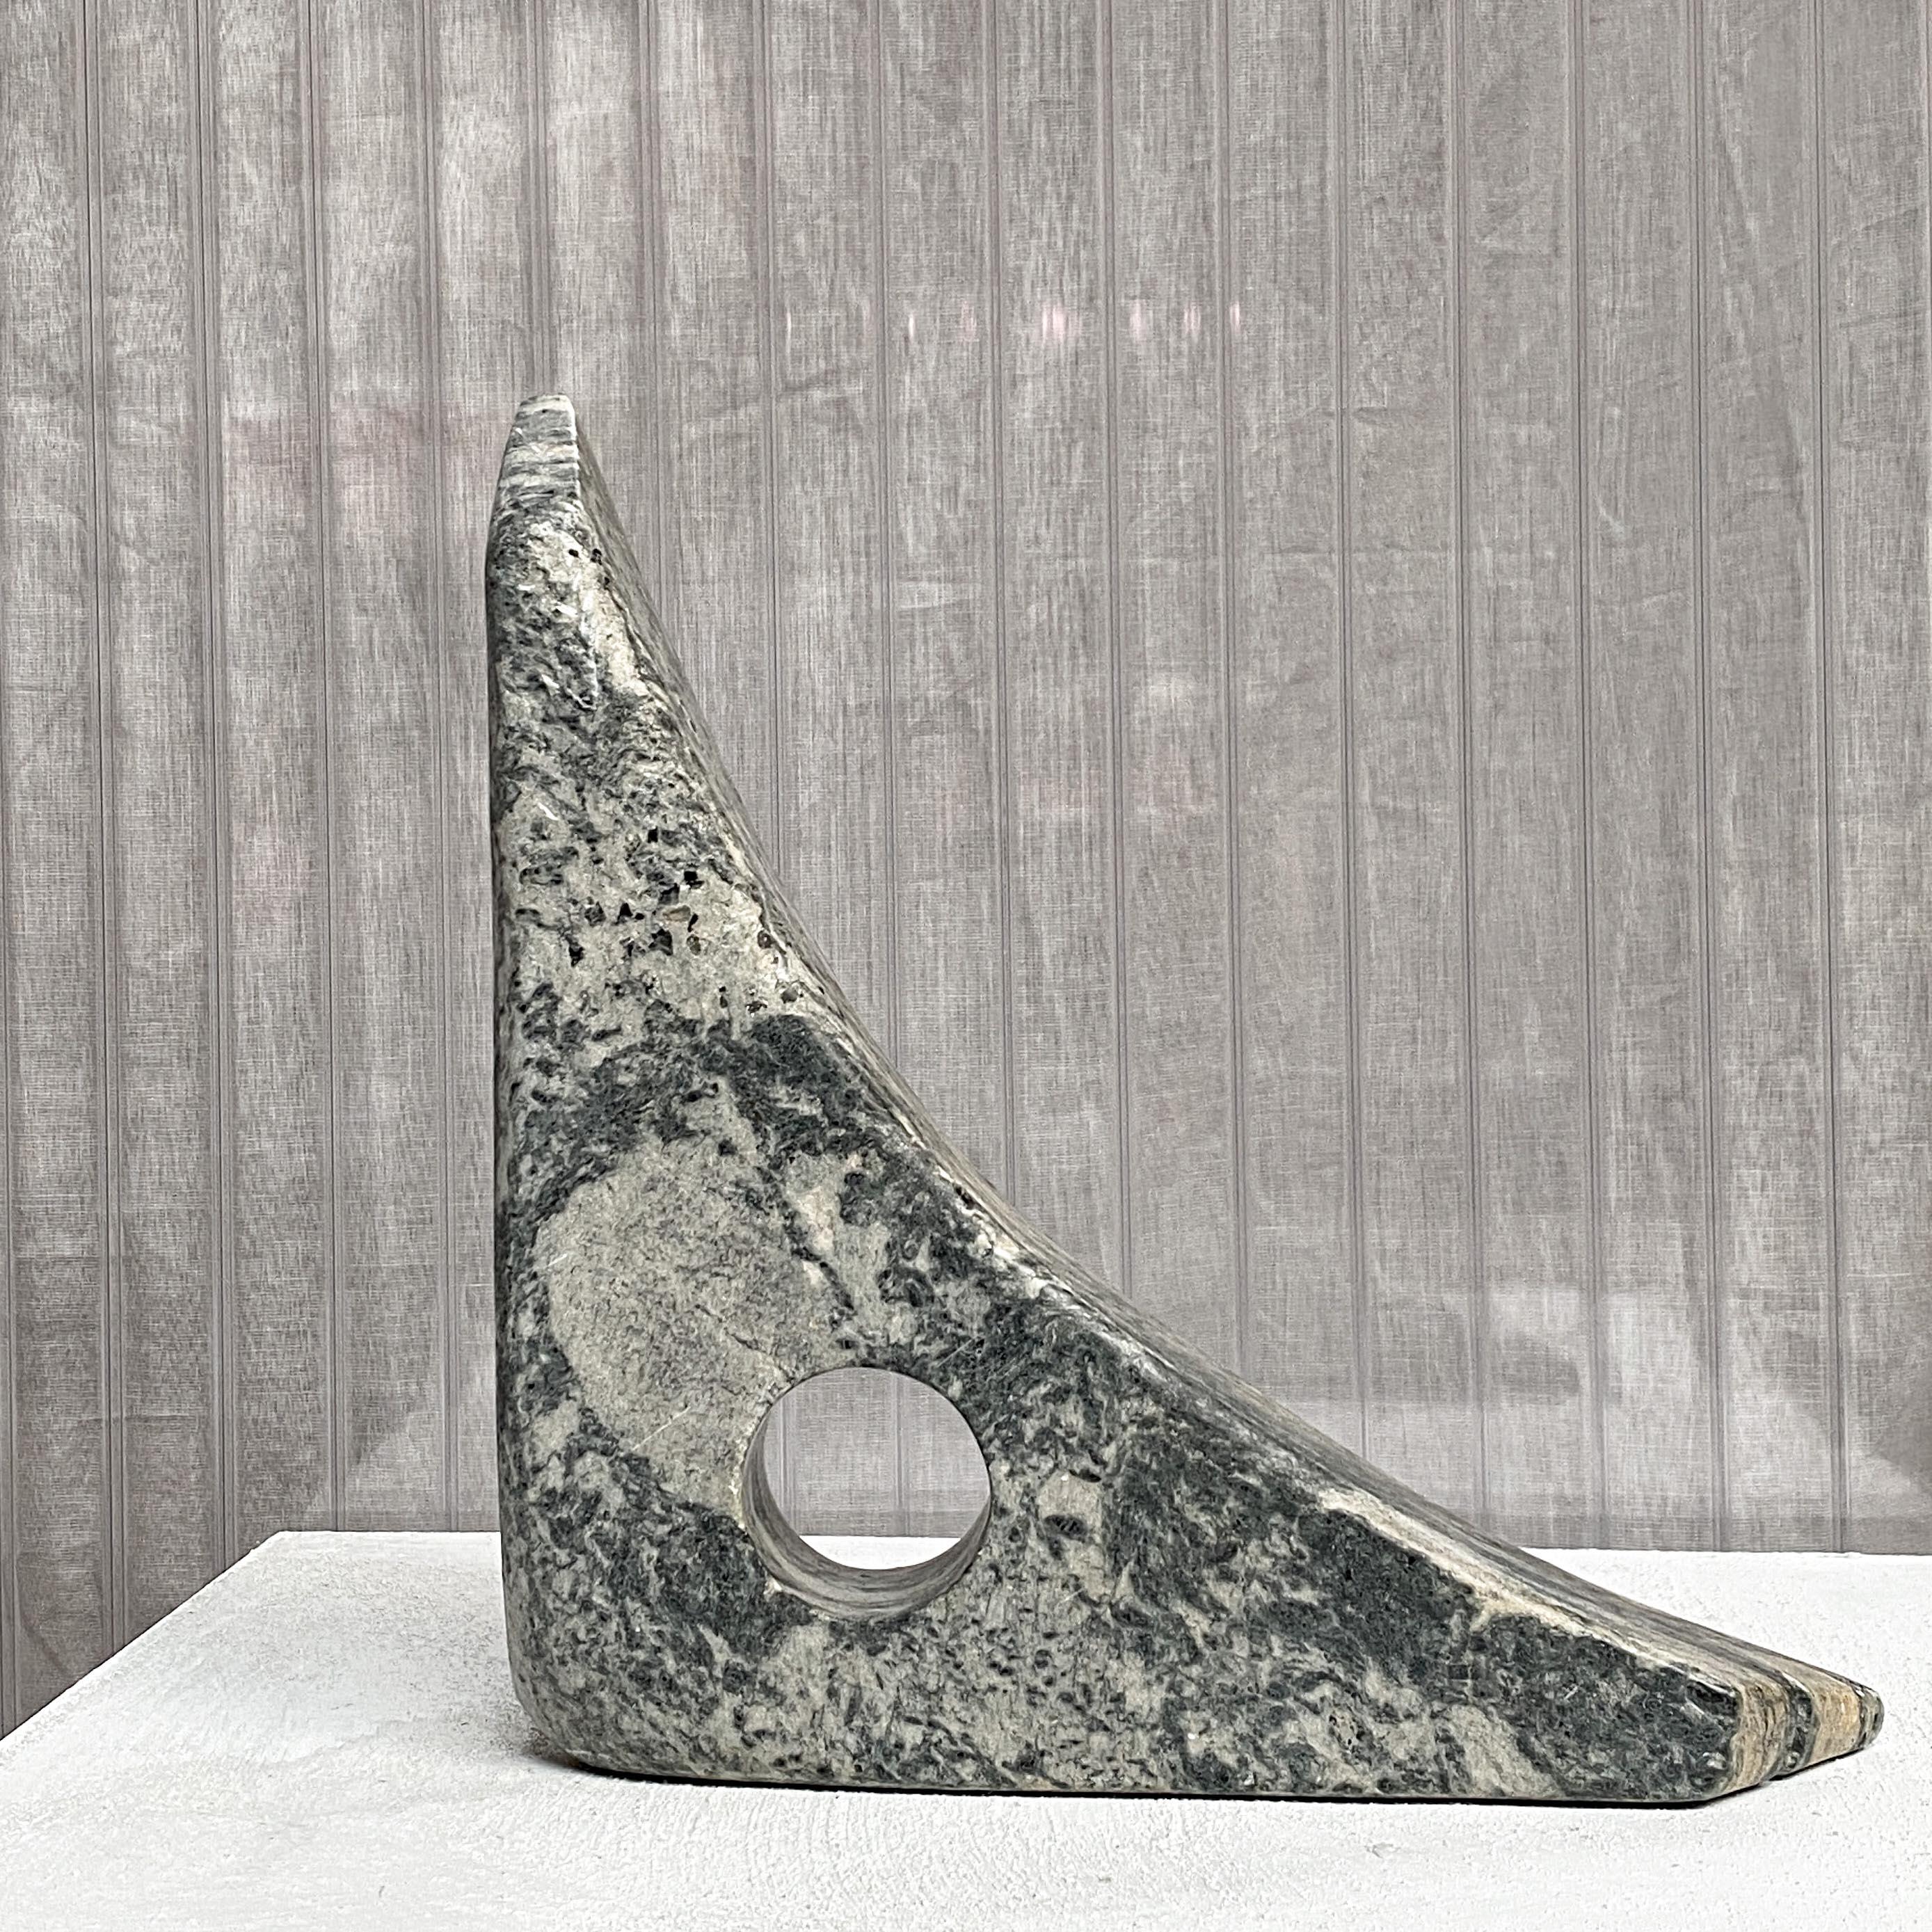 Hand-Carved Modernist Stone Sculpture in Abstract Triangle Shape, 1960s, Noguchi Style